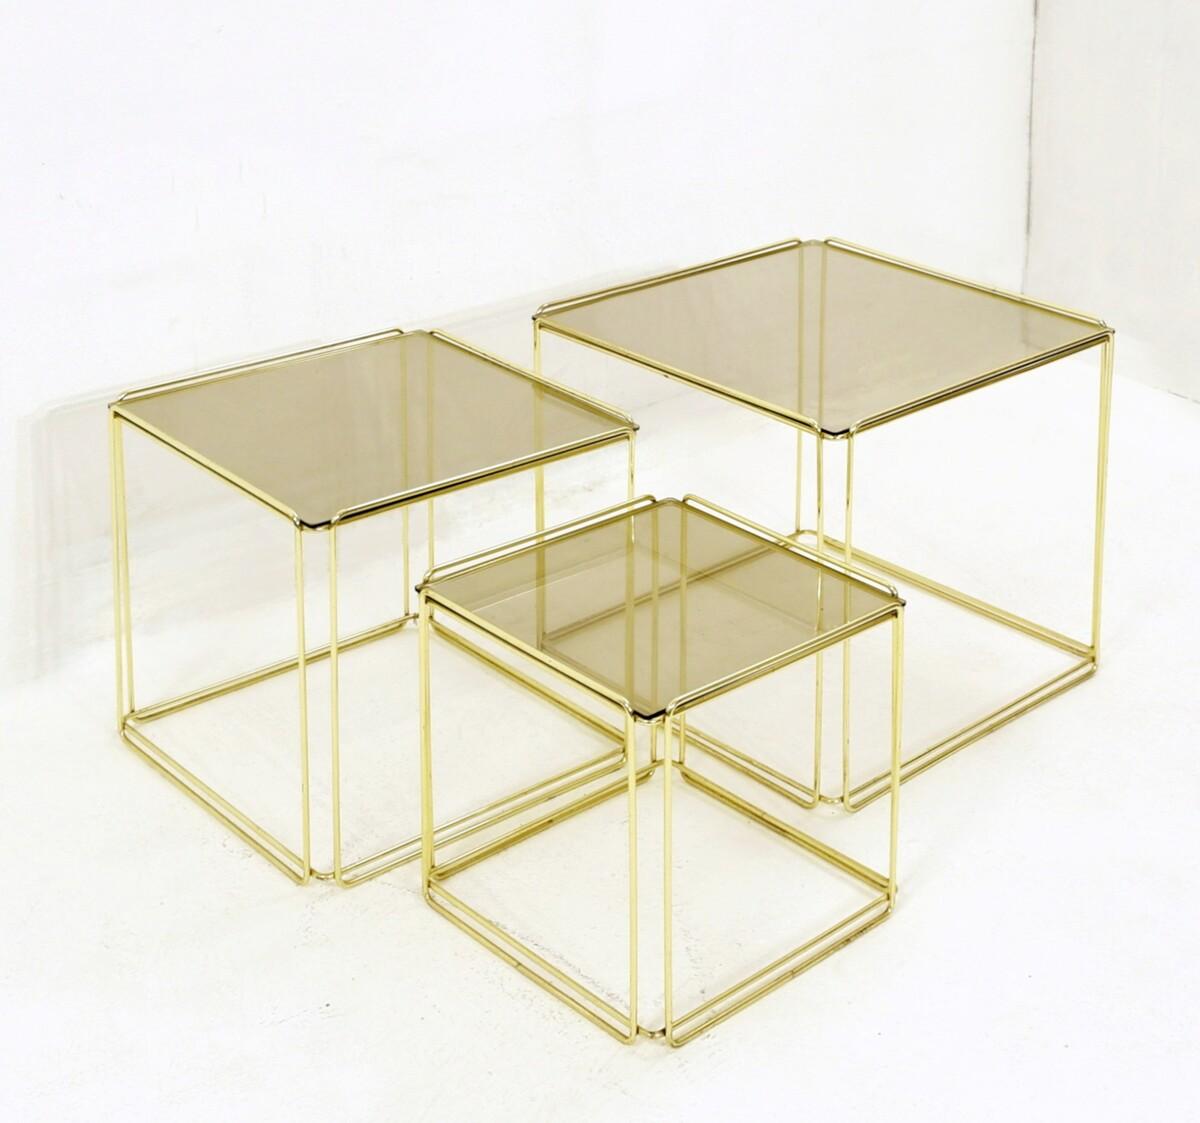 Late 20th Century Set of Three ‘Isocèle’ Gold Nesting Tables by Max Sauze in for Atrow, 1970s